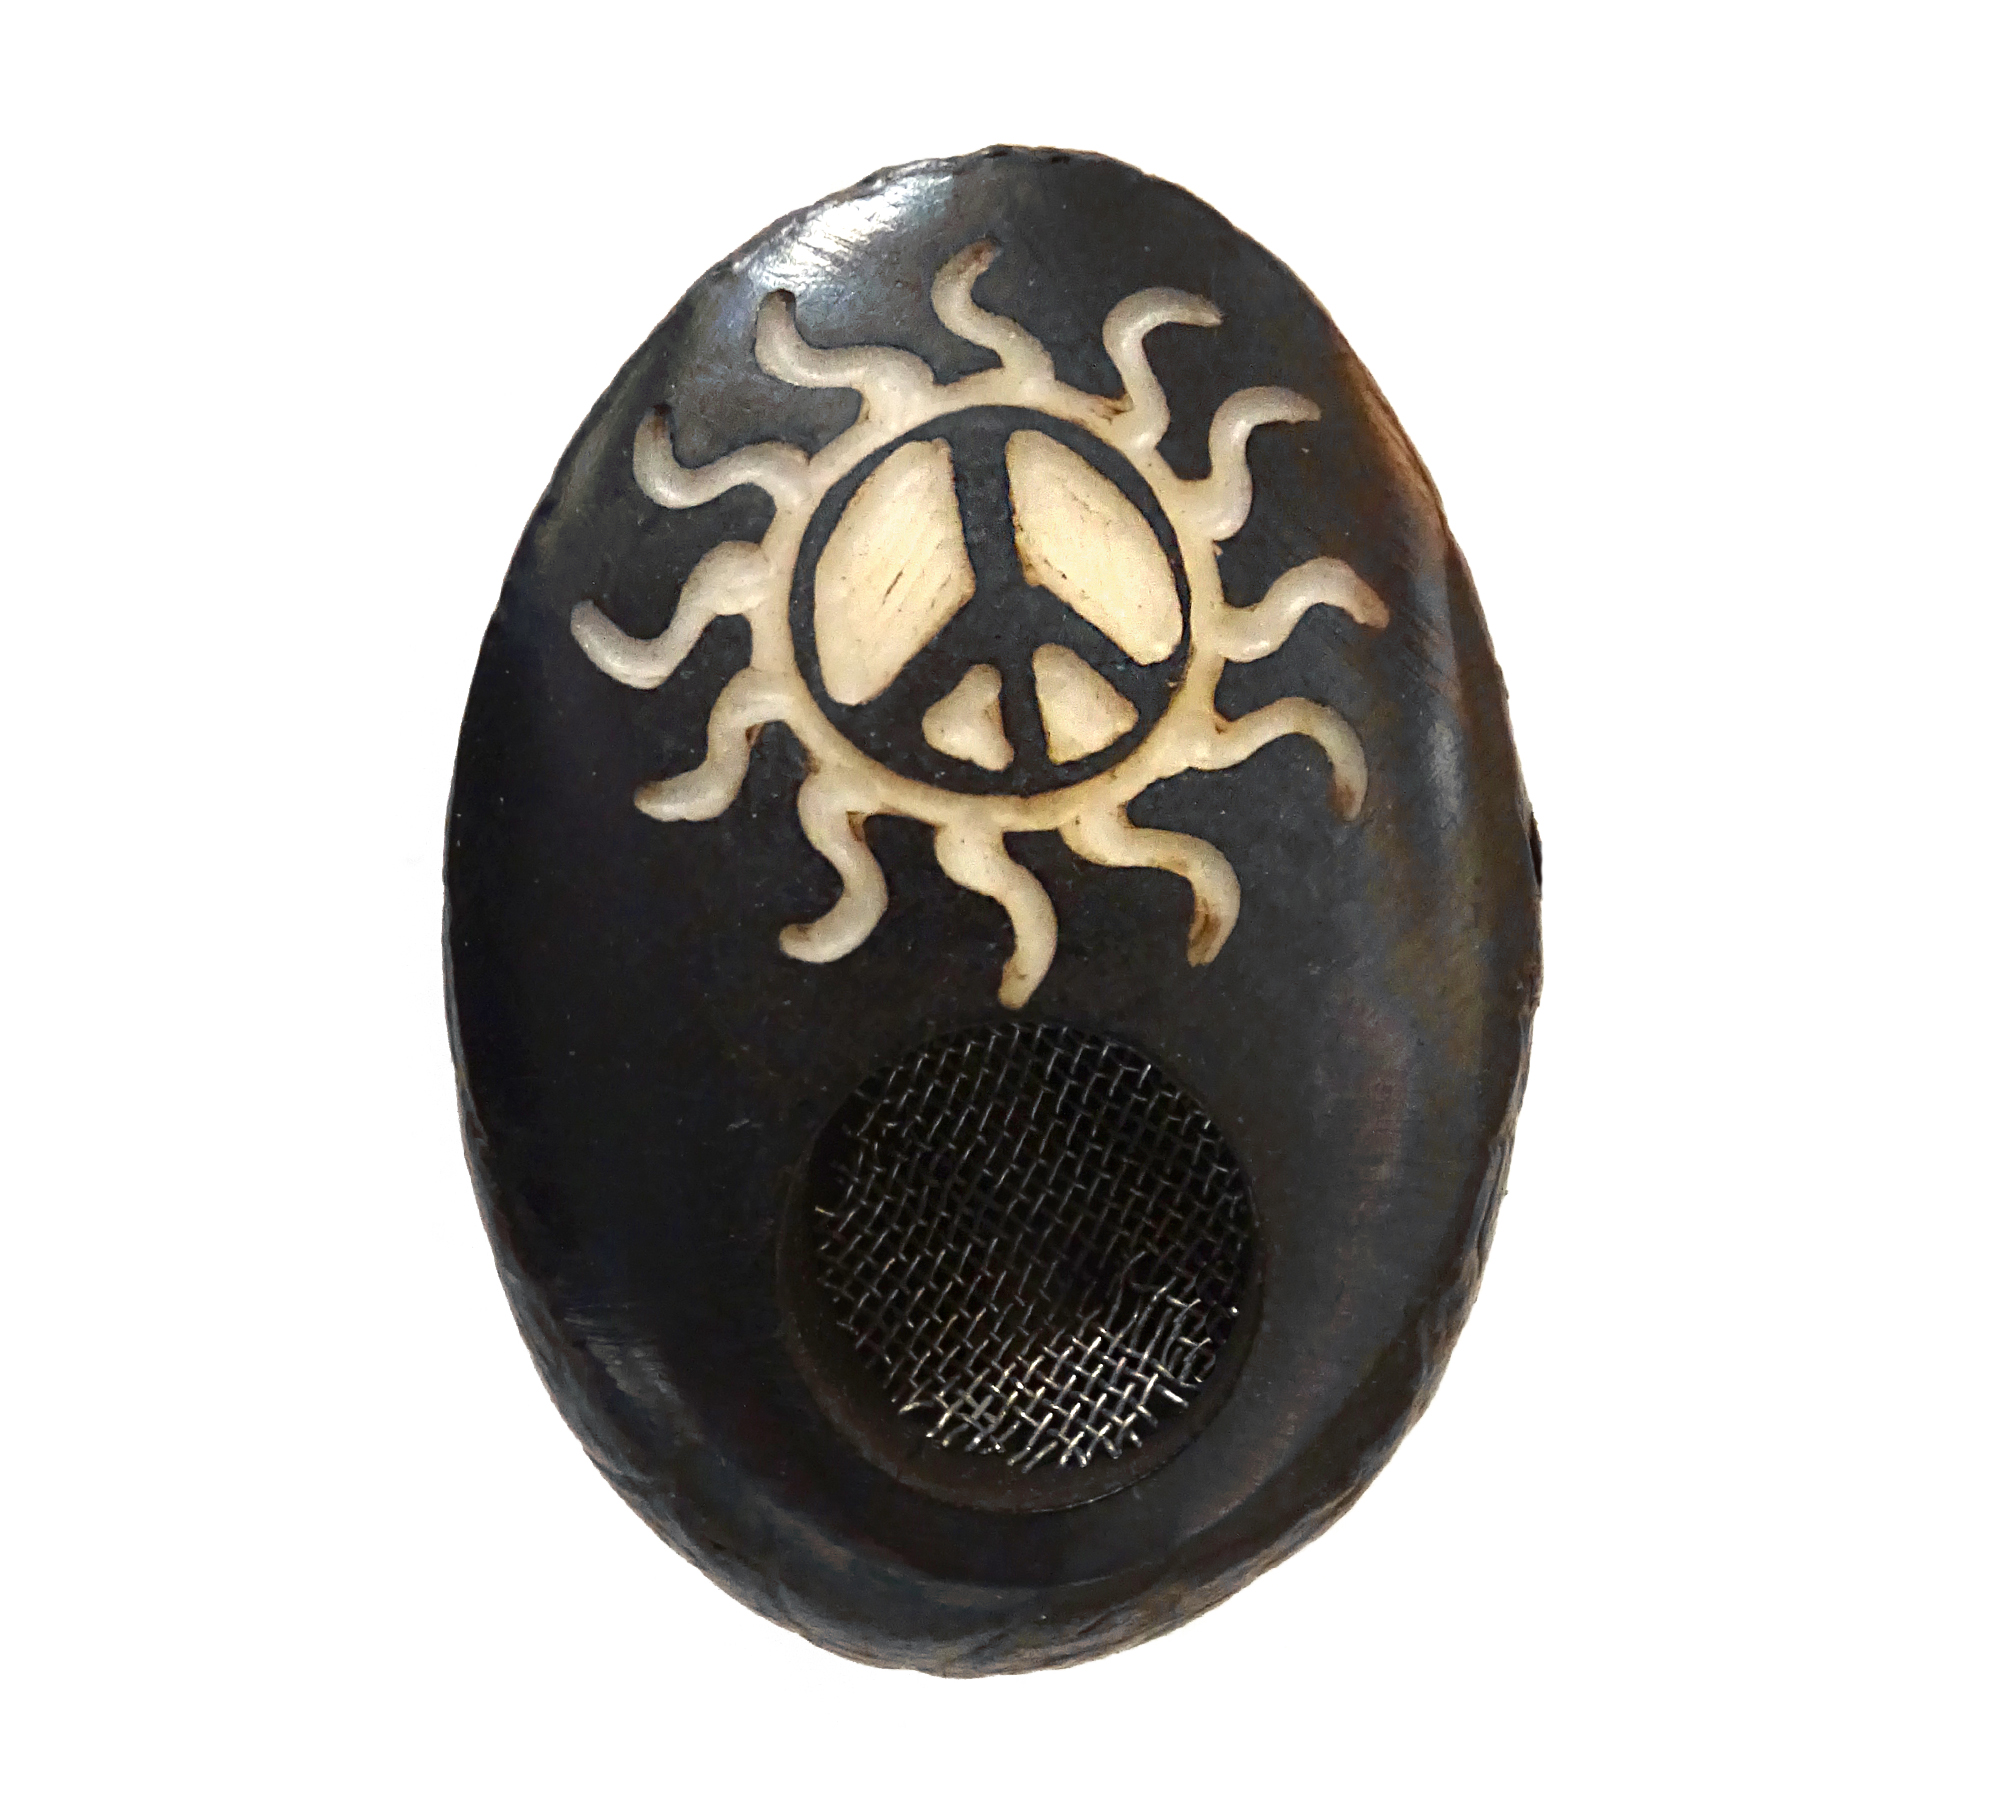 Handcarved tobacco smoking mini round natural tagua nut hand pipe bowl of a peace sign symbol inside of a tribal sun design.